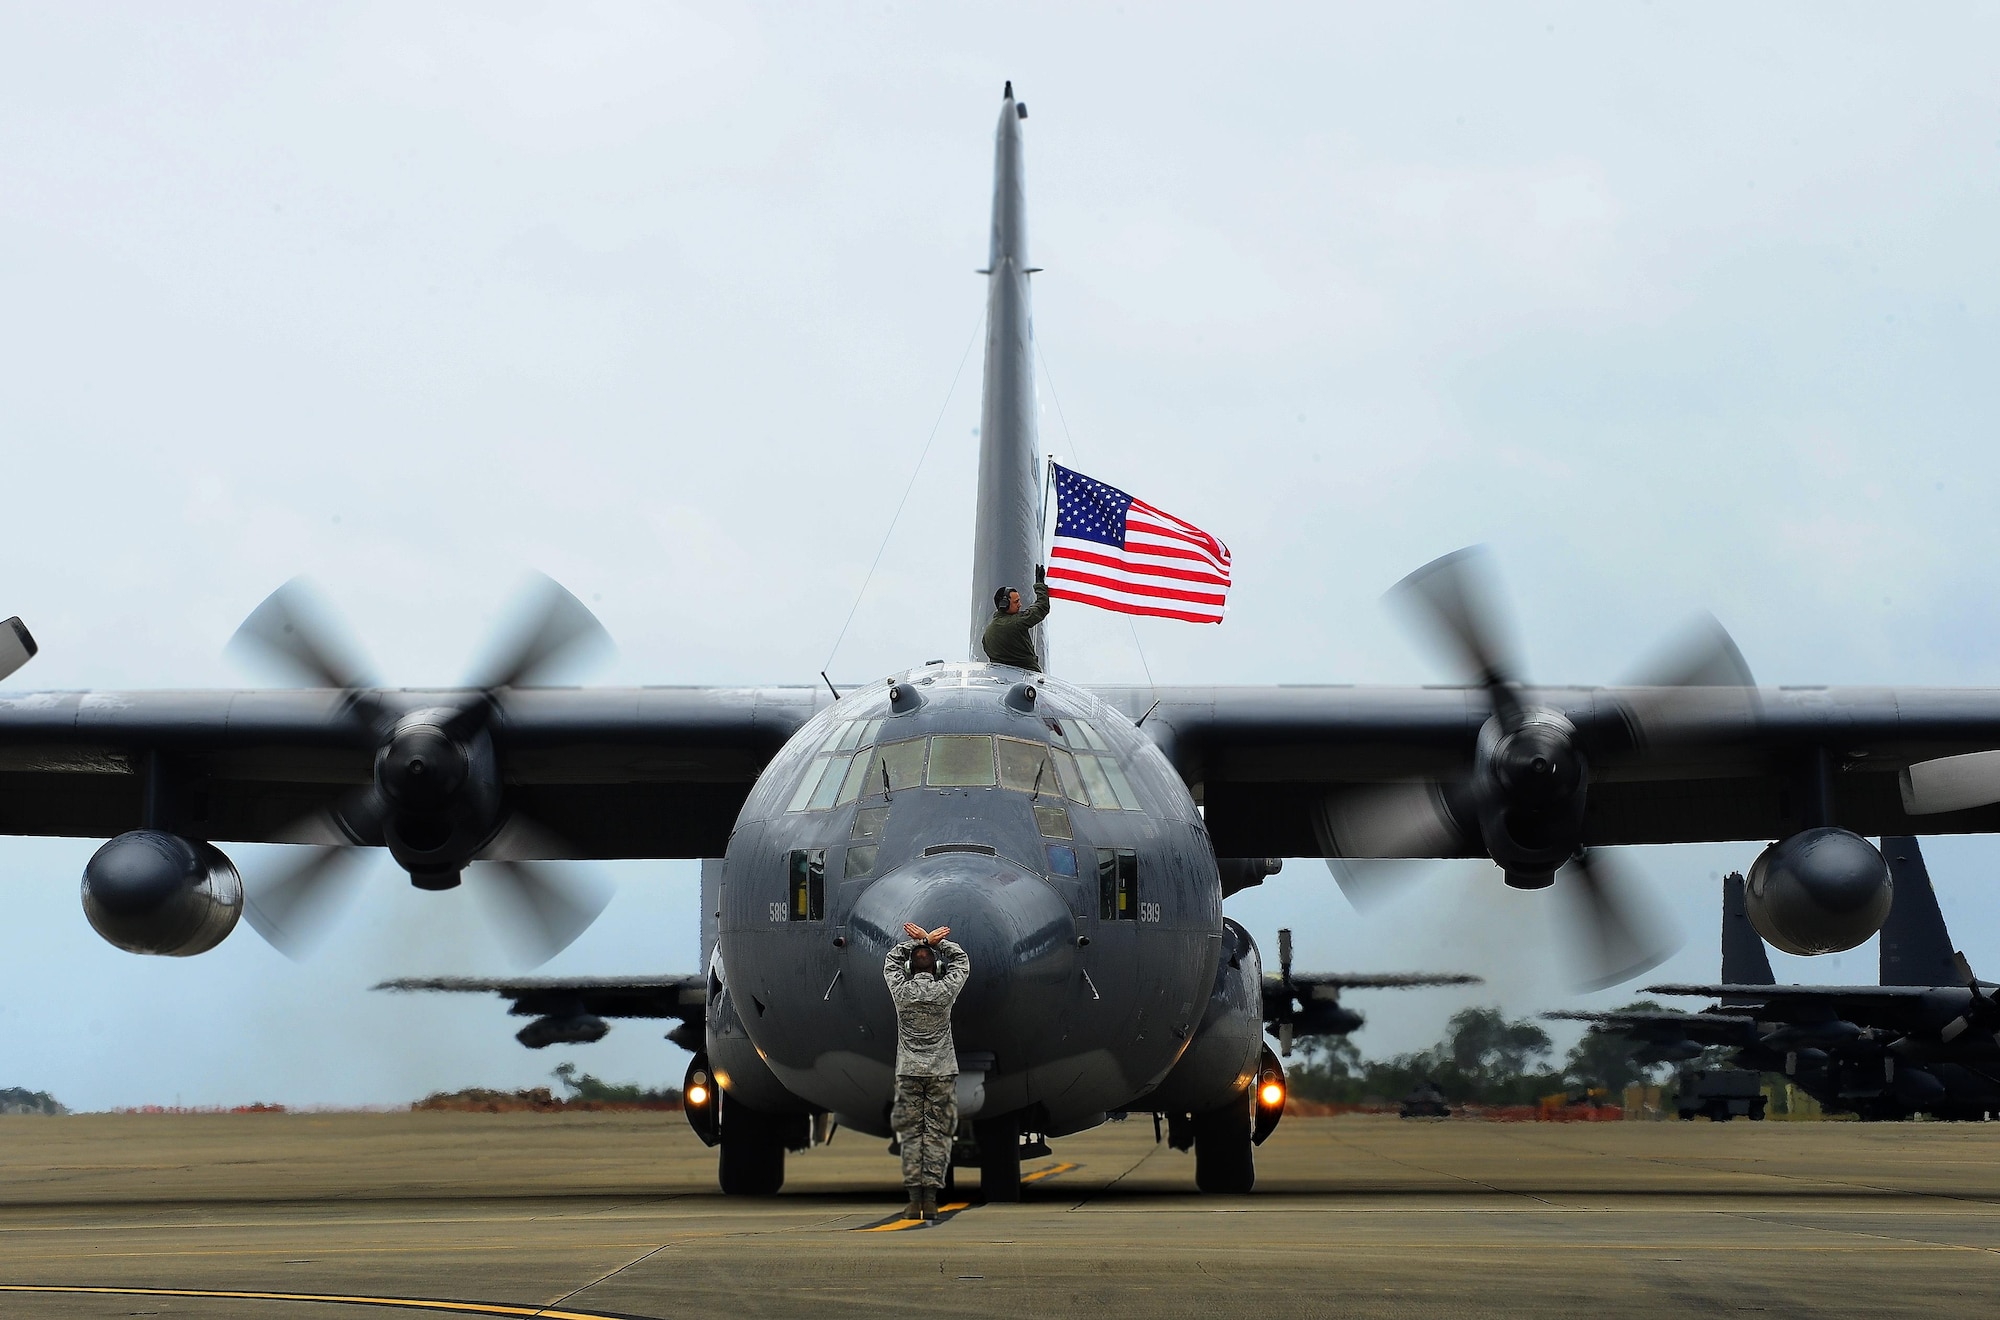 Tech. Sgt. Bruce Ramos, 1st Special Operations Group Detachment 1 radio operator, raises the American flag after retiring the MC 130 P Combat Shadow at Hurlburt Field Fla., May 15, 2015. Built with 1960s technology, the MC-130P began its special operations career in the mid-1980s and went on to conduct critical air refueling missions in the late 1980s during Operation Just Cause in Panama and the early 1990s during Operation Desert Storm. (U.S. Air Force photo/Airman 1st Class Andrea Posey)